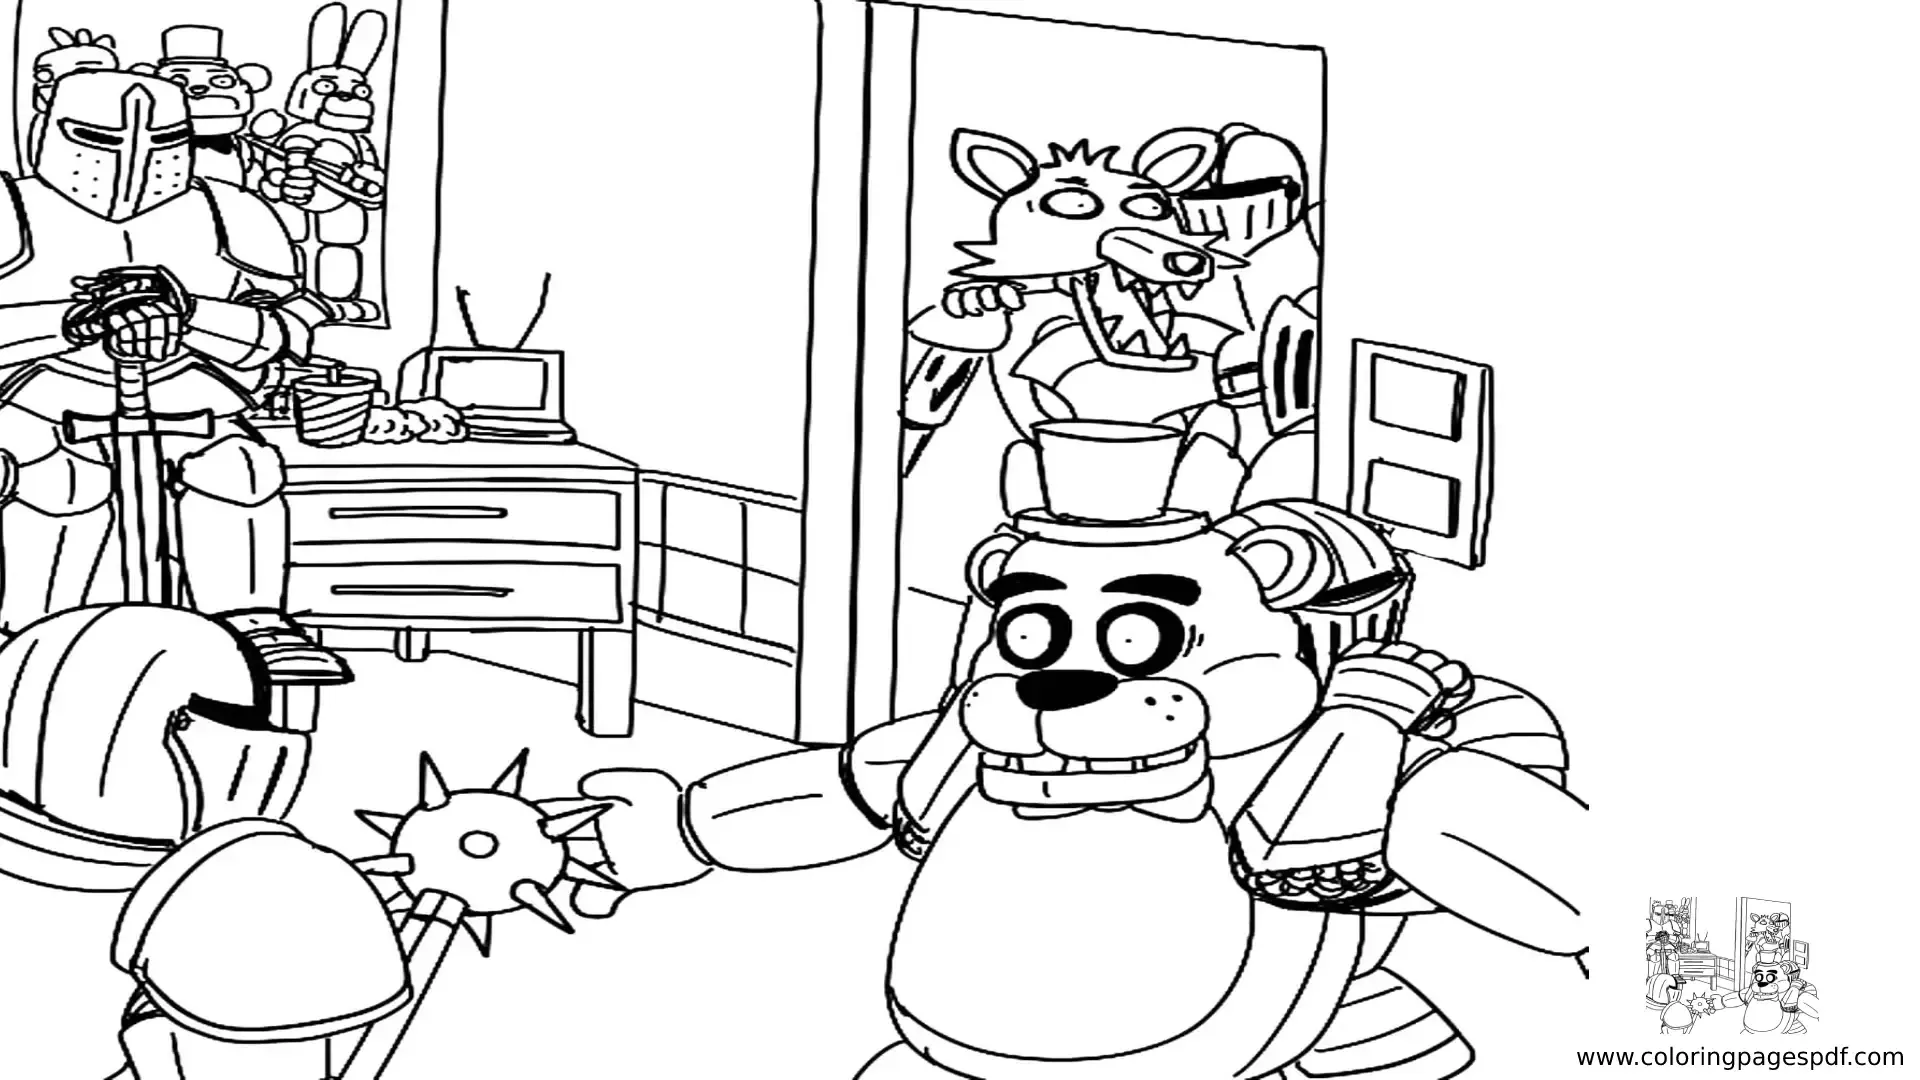 Coloring Pages Of Fnaf Toys Fighting Knights